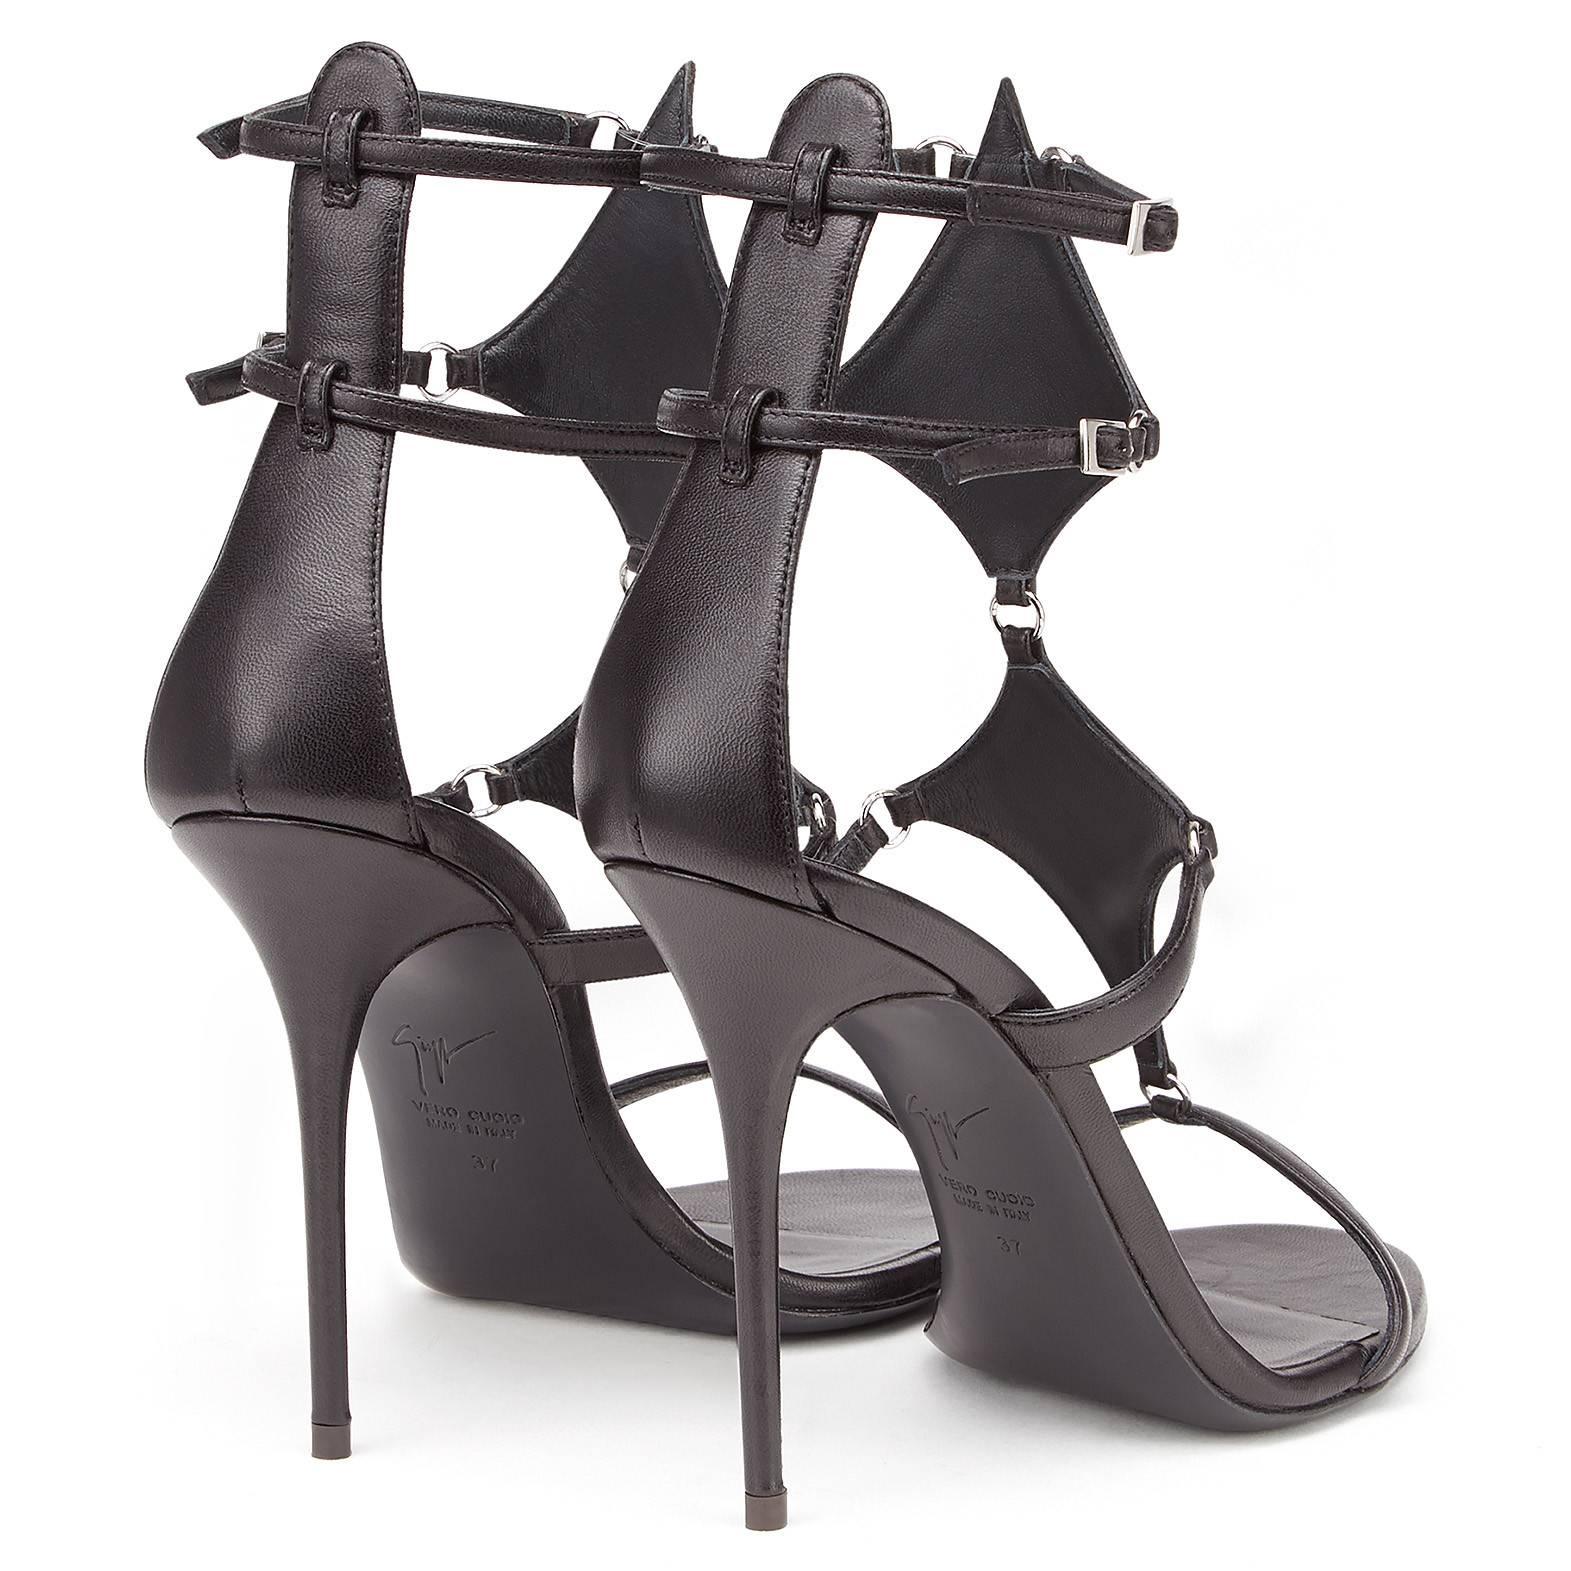 Giuseppe Zanotti New Black Leather Cut Out Strappy Evening Sandals Heels in Box 1